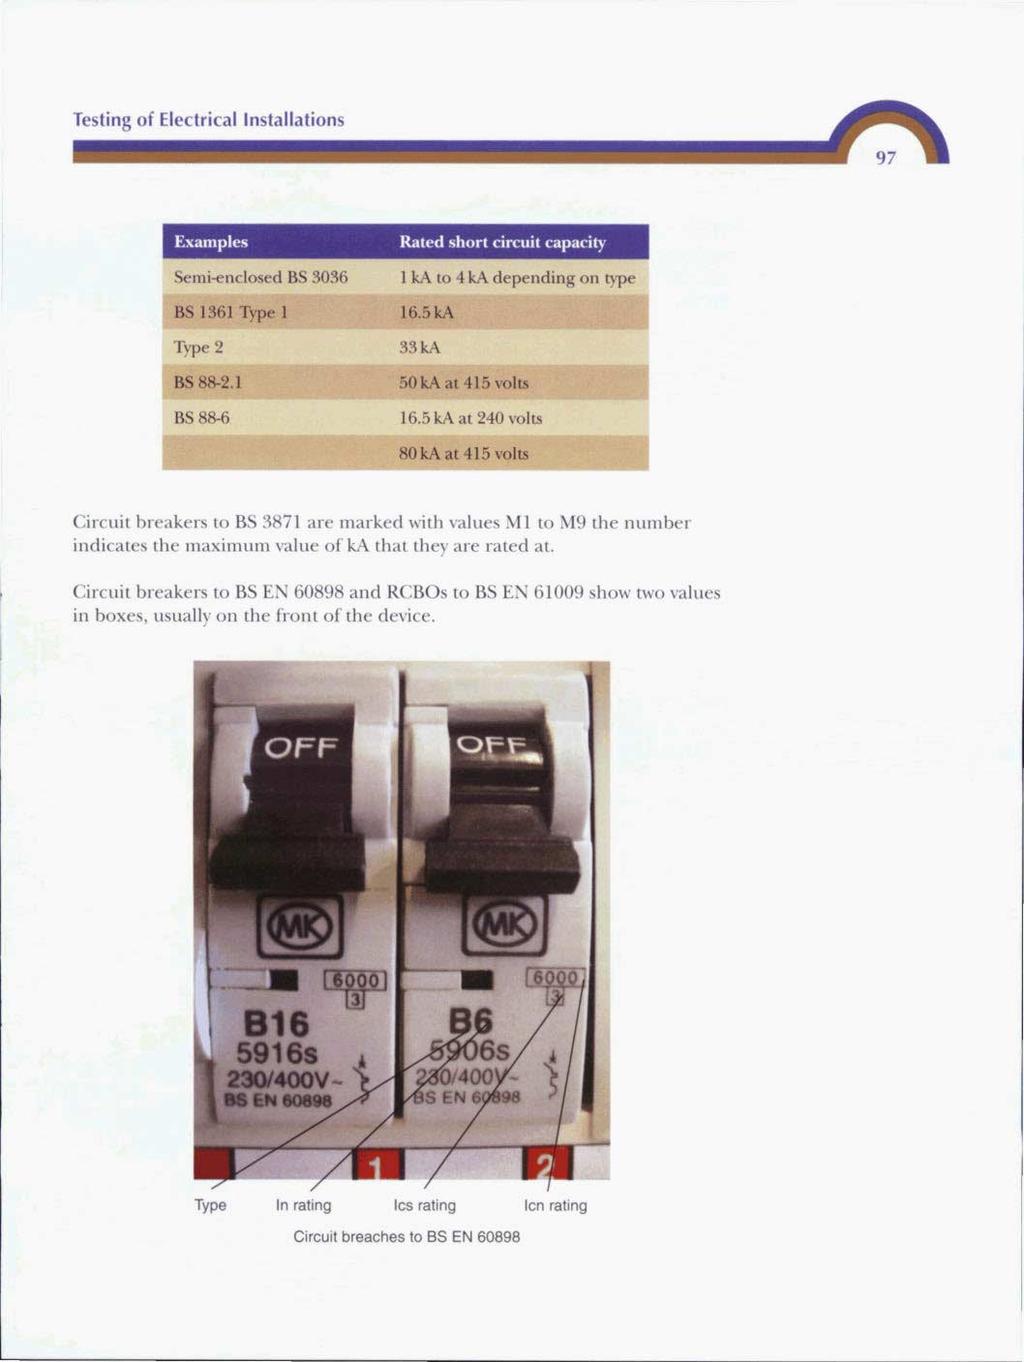 Testing of Electrical Installations jemi-enclosed BS 3036 Circuit breakers to BS 3871 are marked with values M1 to M9 the number indicates the maximum value of ka that they are rated at.